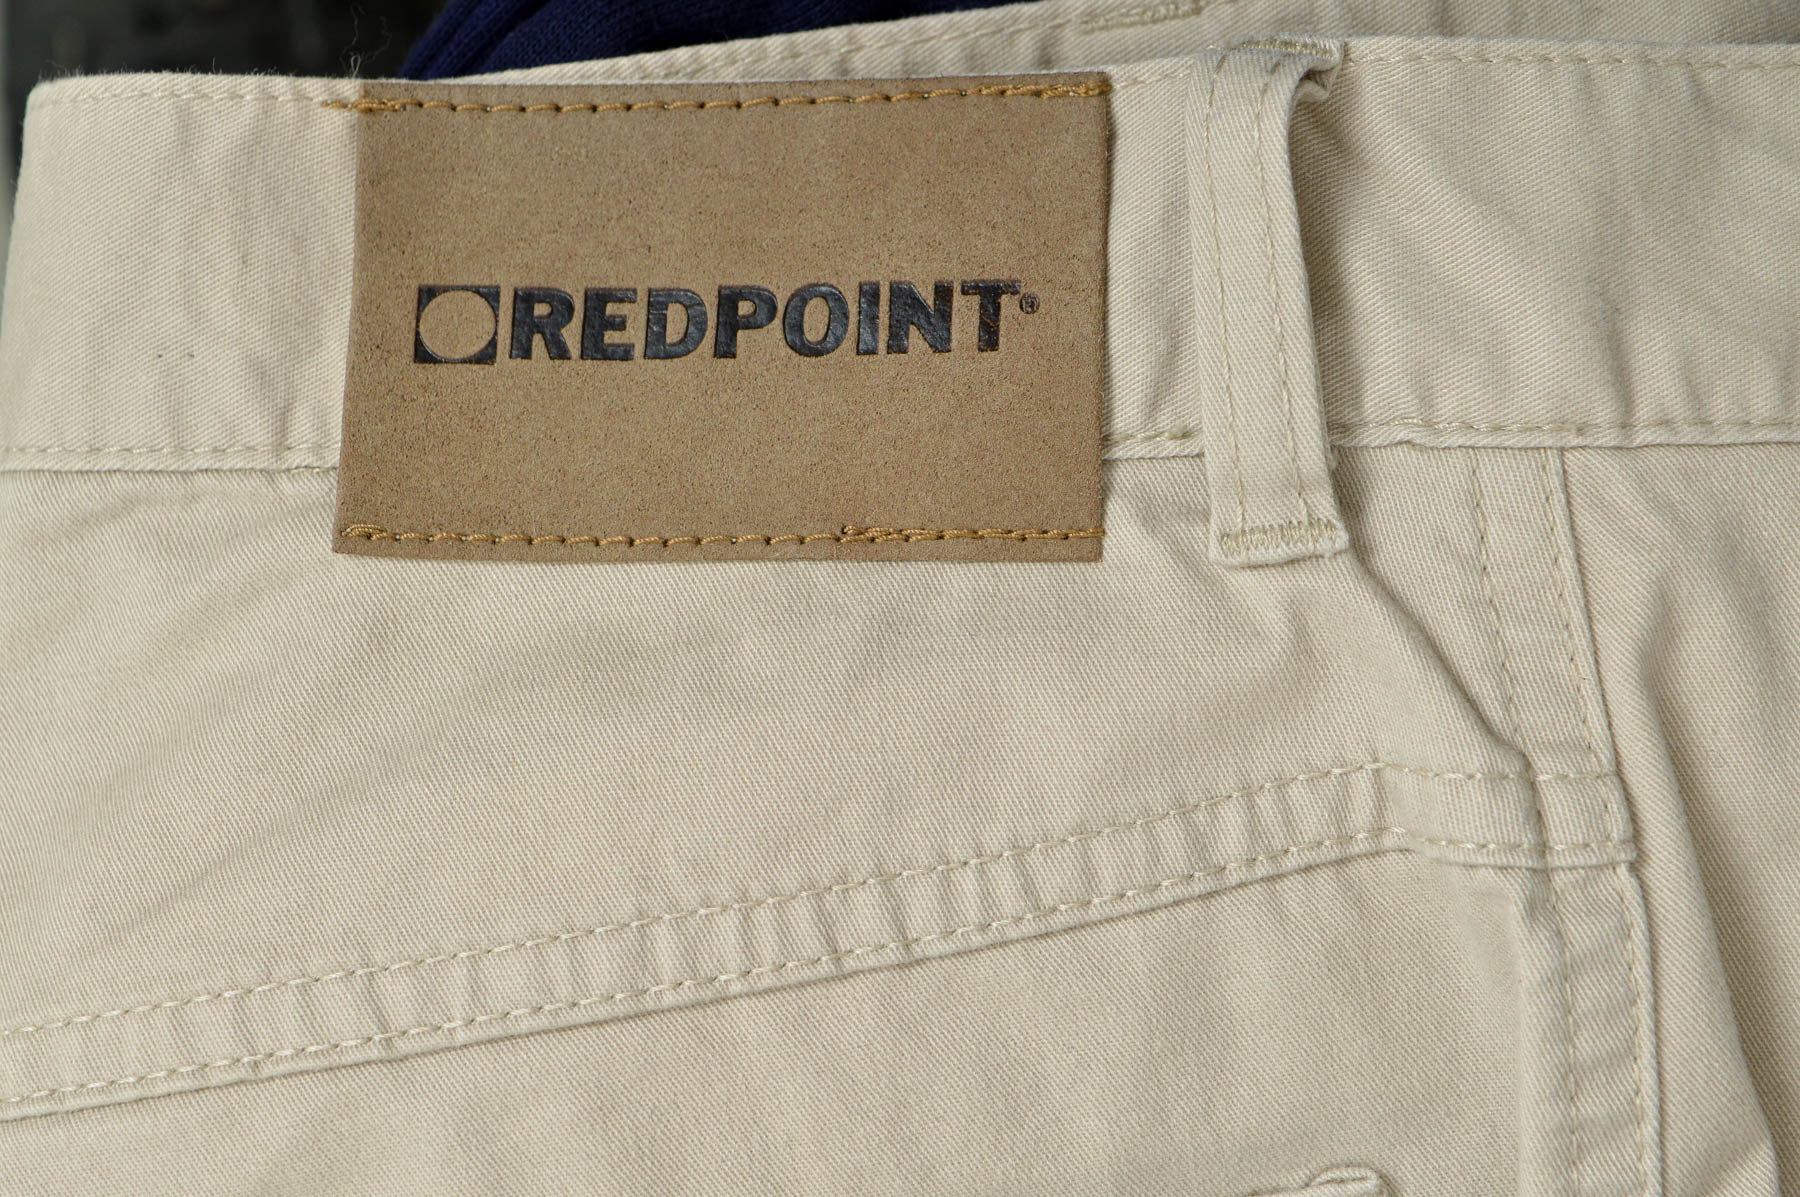 Men's trousers - Redpoint - 2